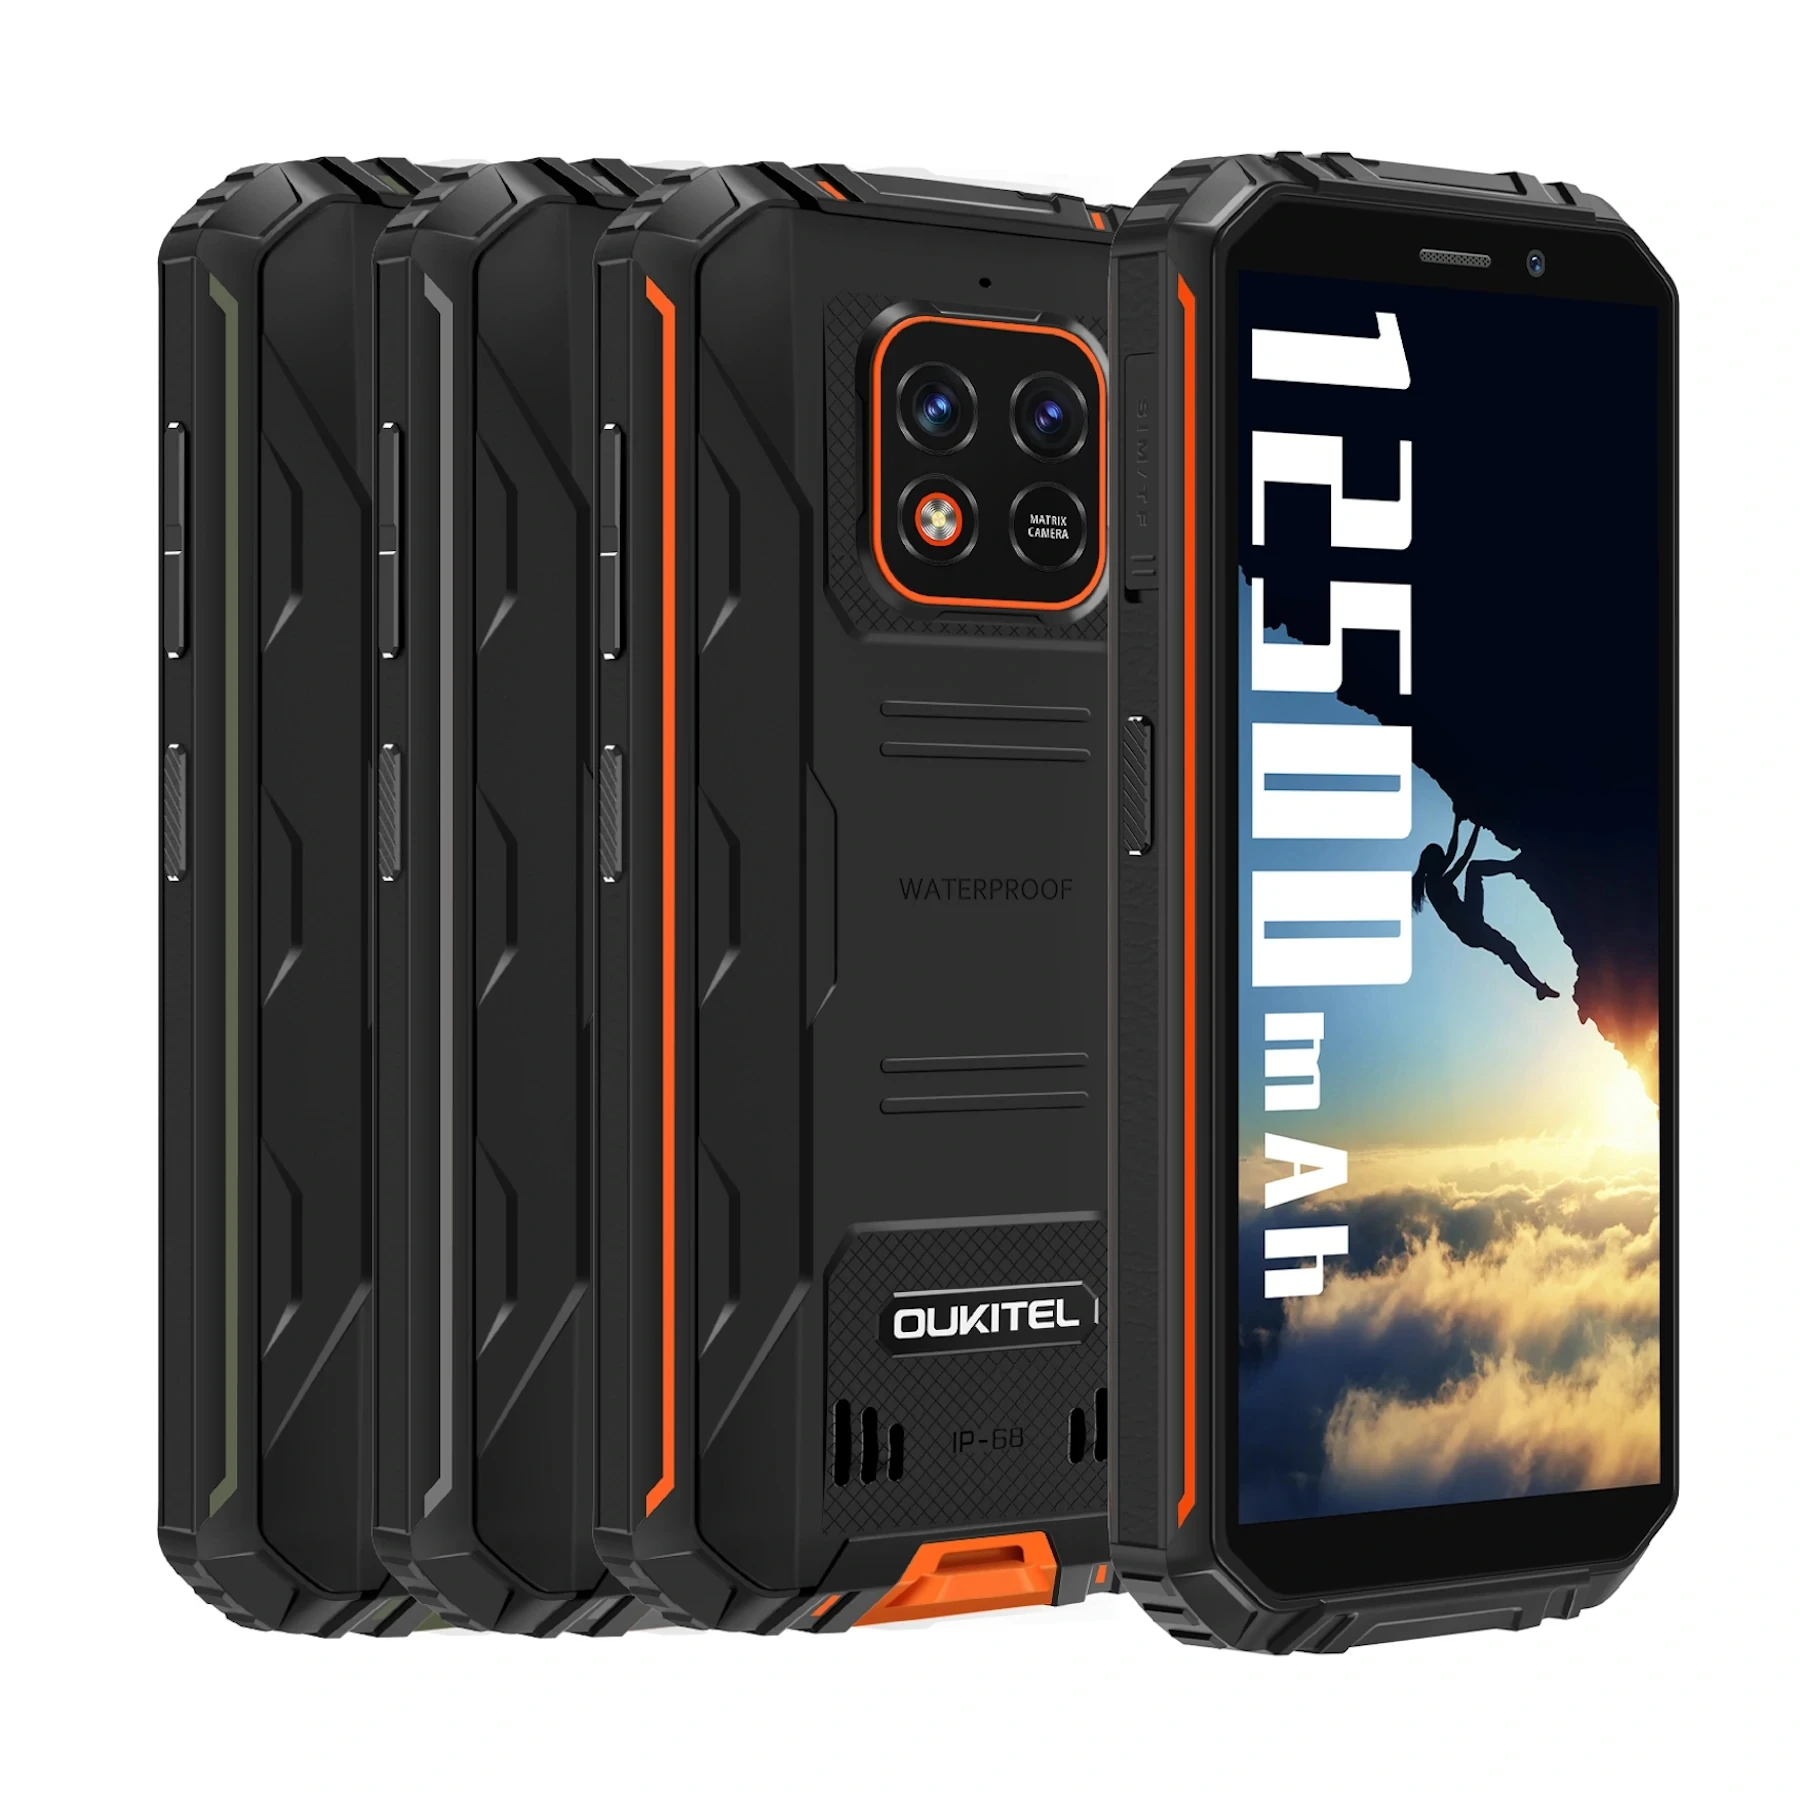 

Oukitel WP18 Rugged Smartphone 5.93" 4G RAM 32G ROM Android 11 12500mAh Mobile Phone Helio A22 13MP Quad Core IP68 Cell Phone